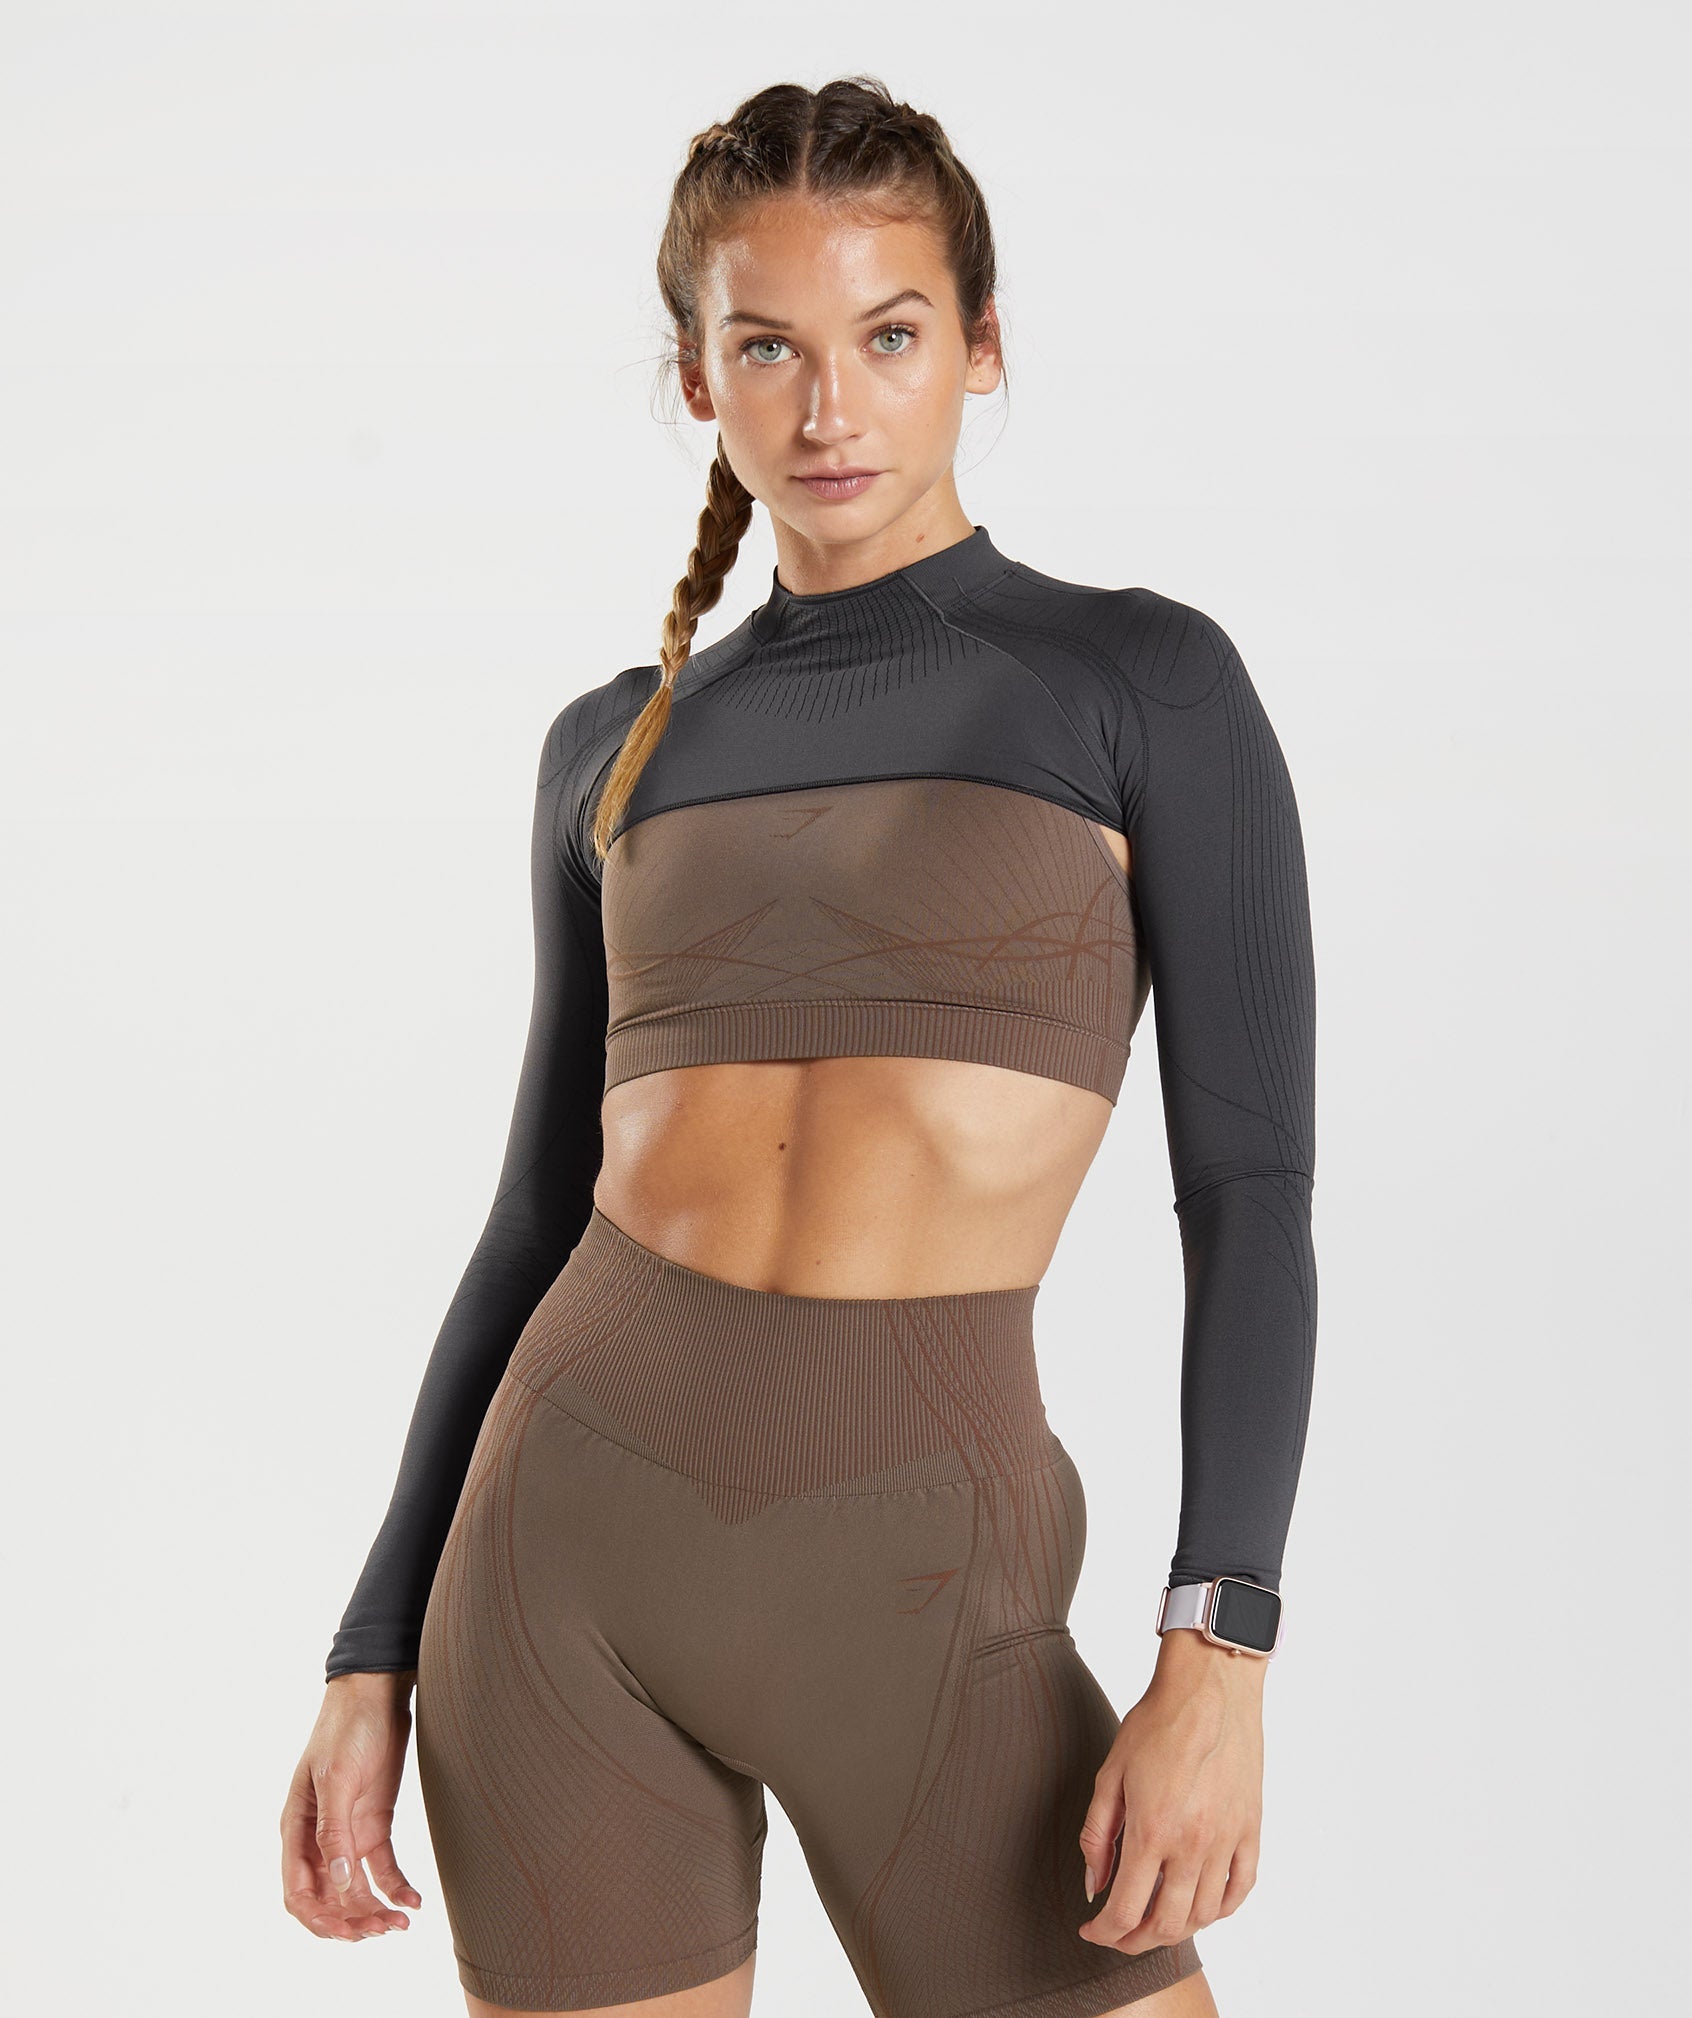 GYMSHARK FORM SUPERCROP SHRUG WITH THUMBHOLES 🖤 Size Small